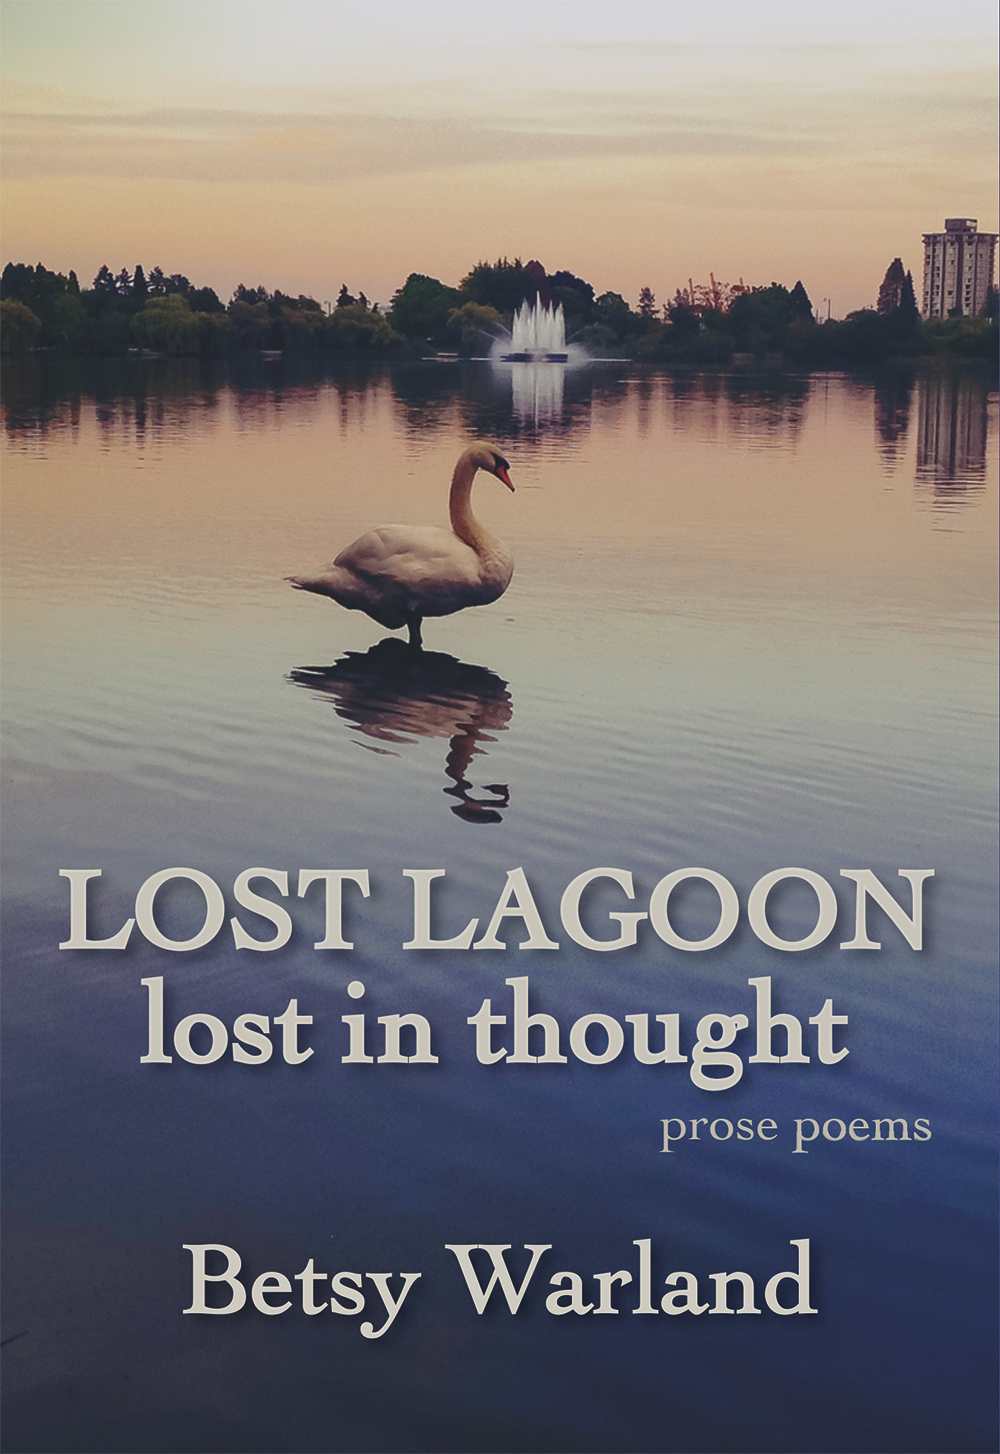 the cover of Betsy Warland's Lost Lagoon/lost in thought